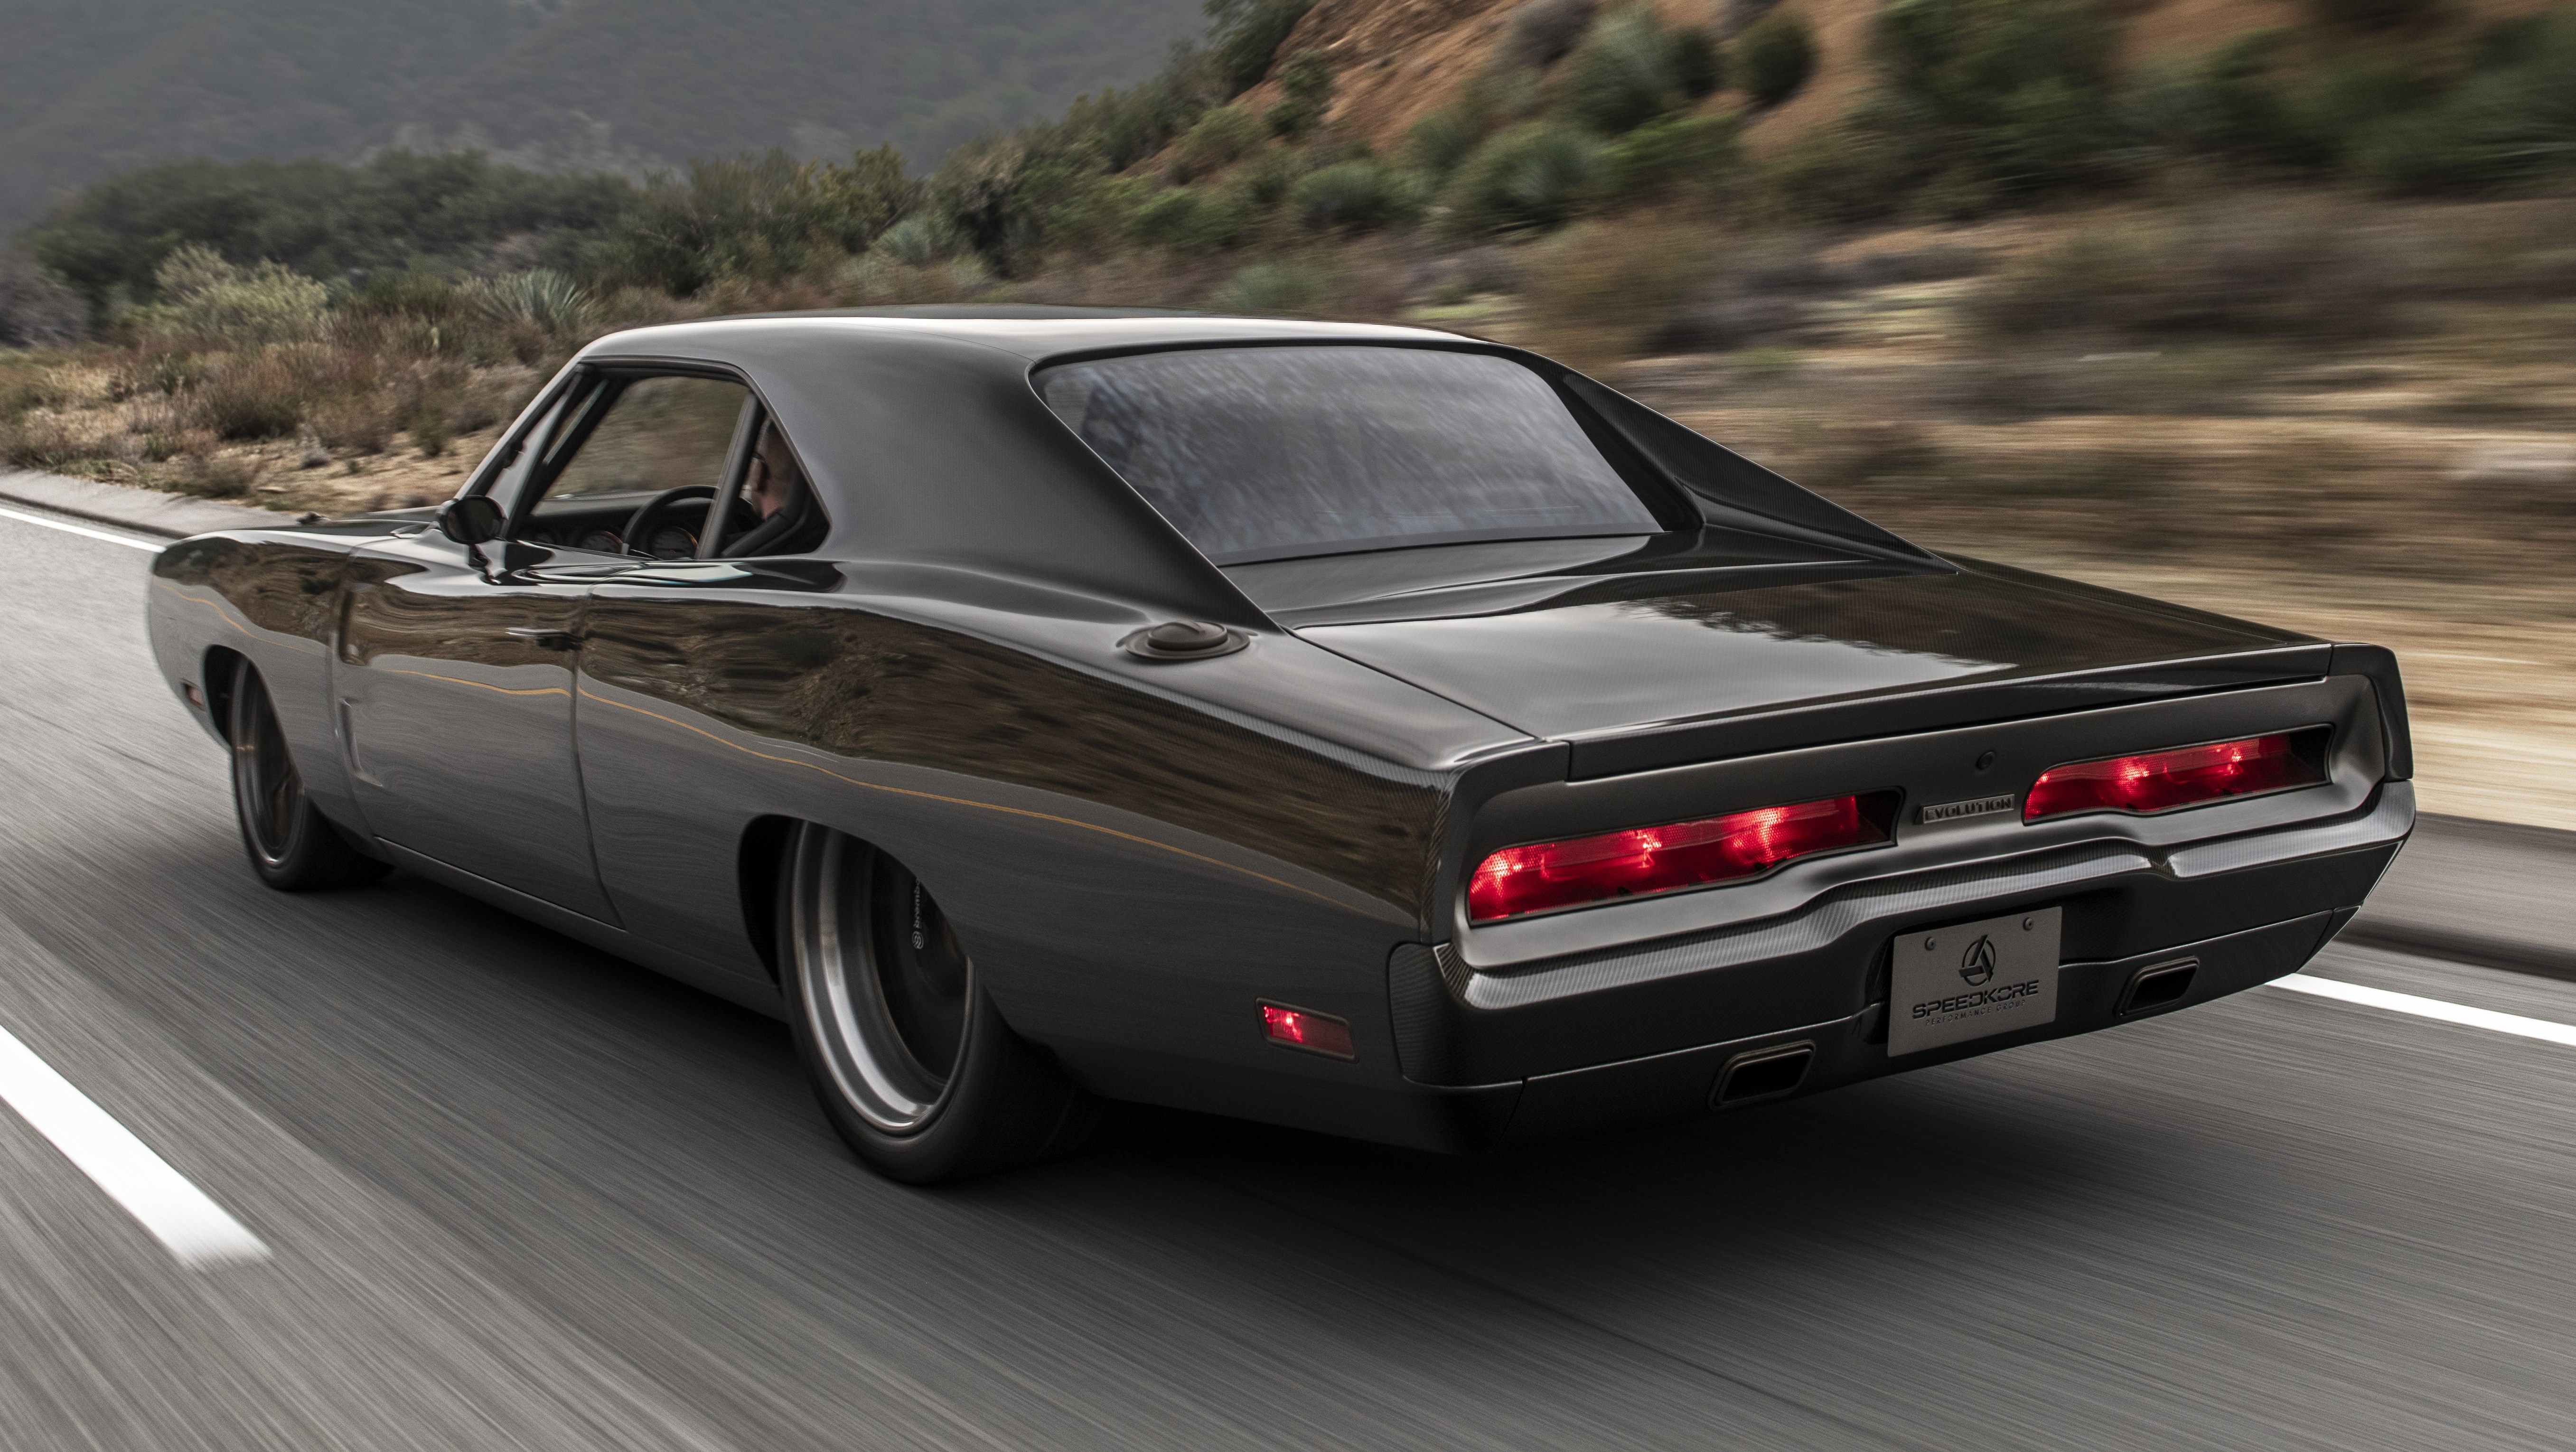 Dodge Challenger on the move